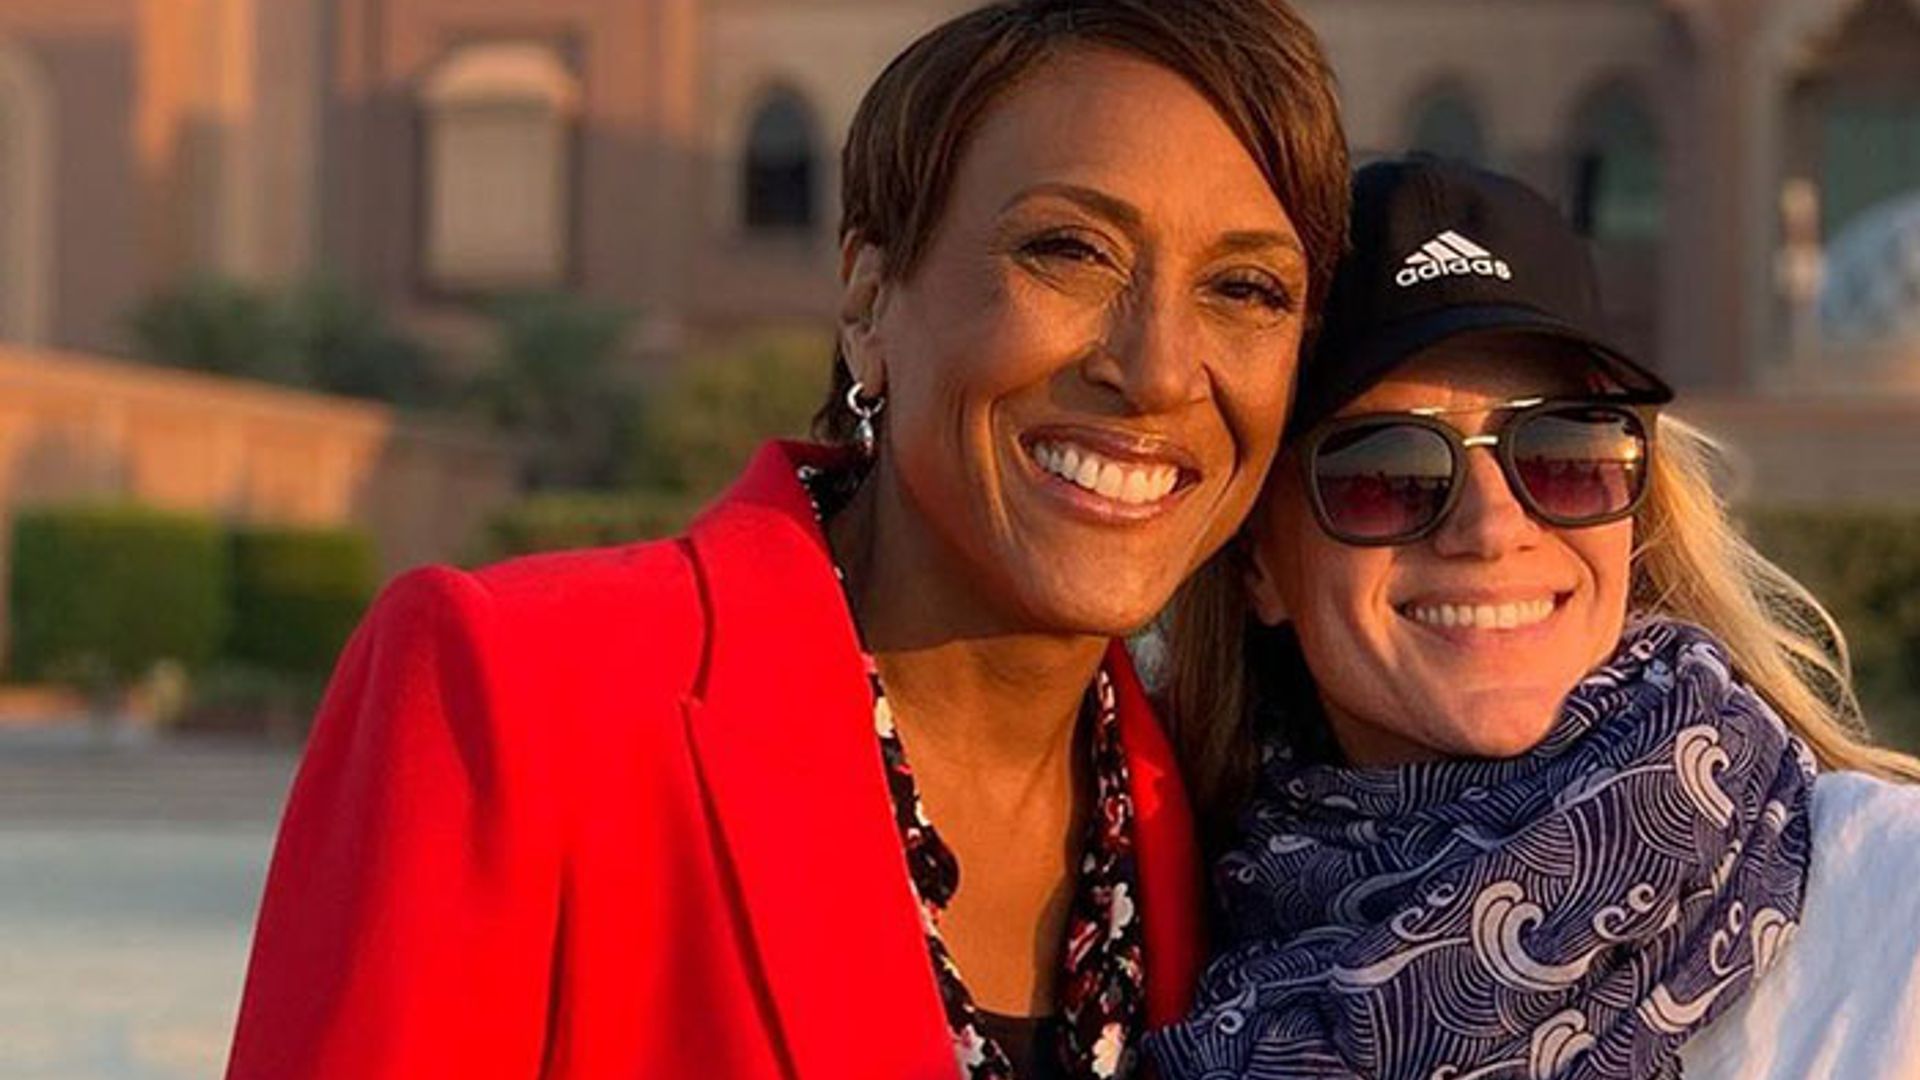 robin roberts with amber laign outside